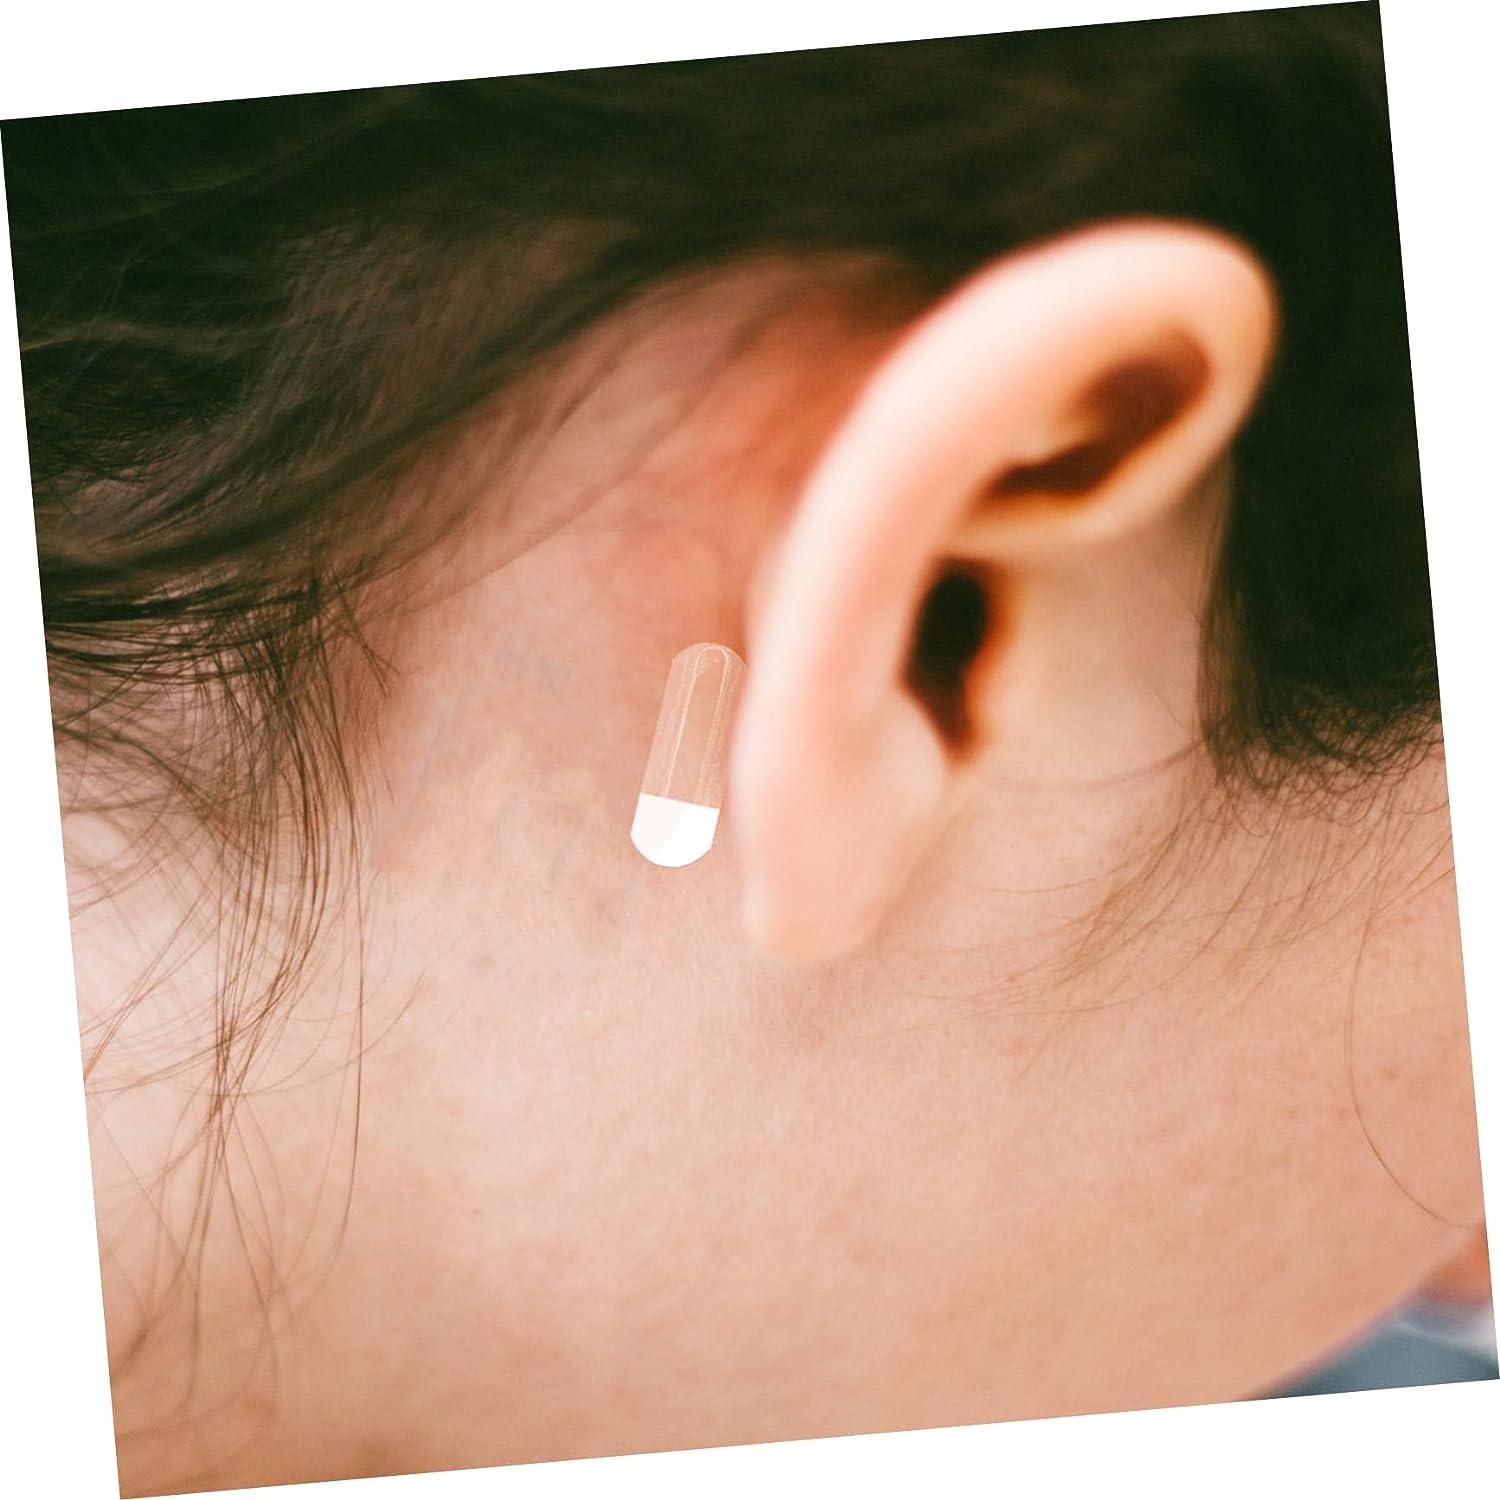 OLOEY 30pcs Elf Ear Stickers Veneer Ears Become Ear Correction Vertical Ear  Sticker Stand Ear Stereotypes V-Face Stickers 